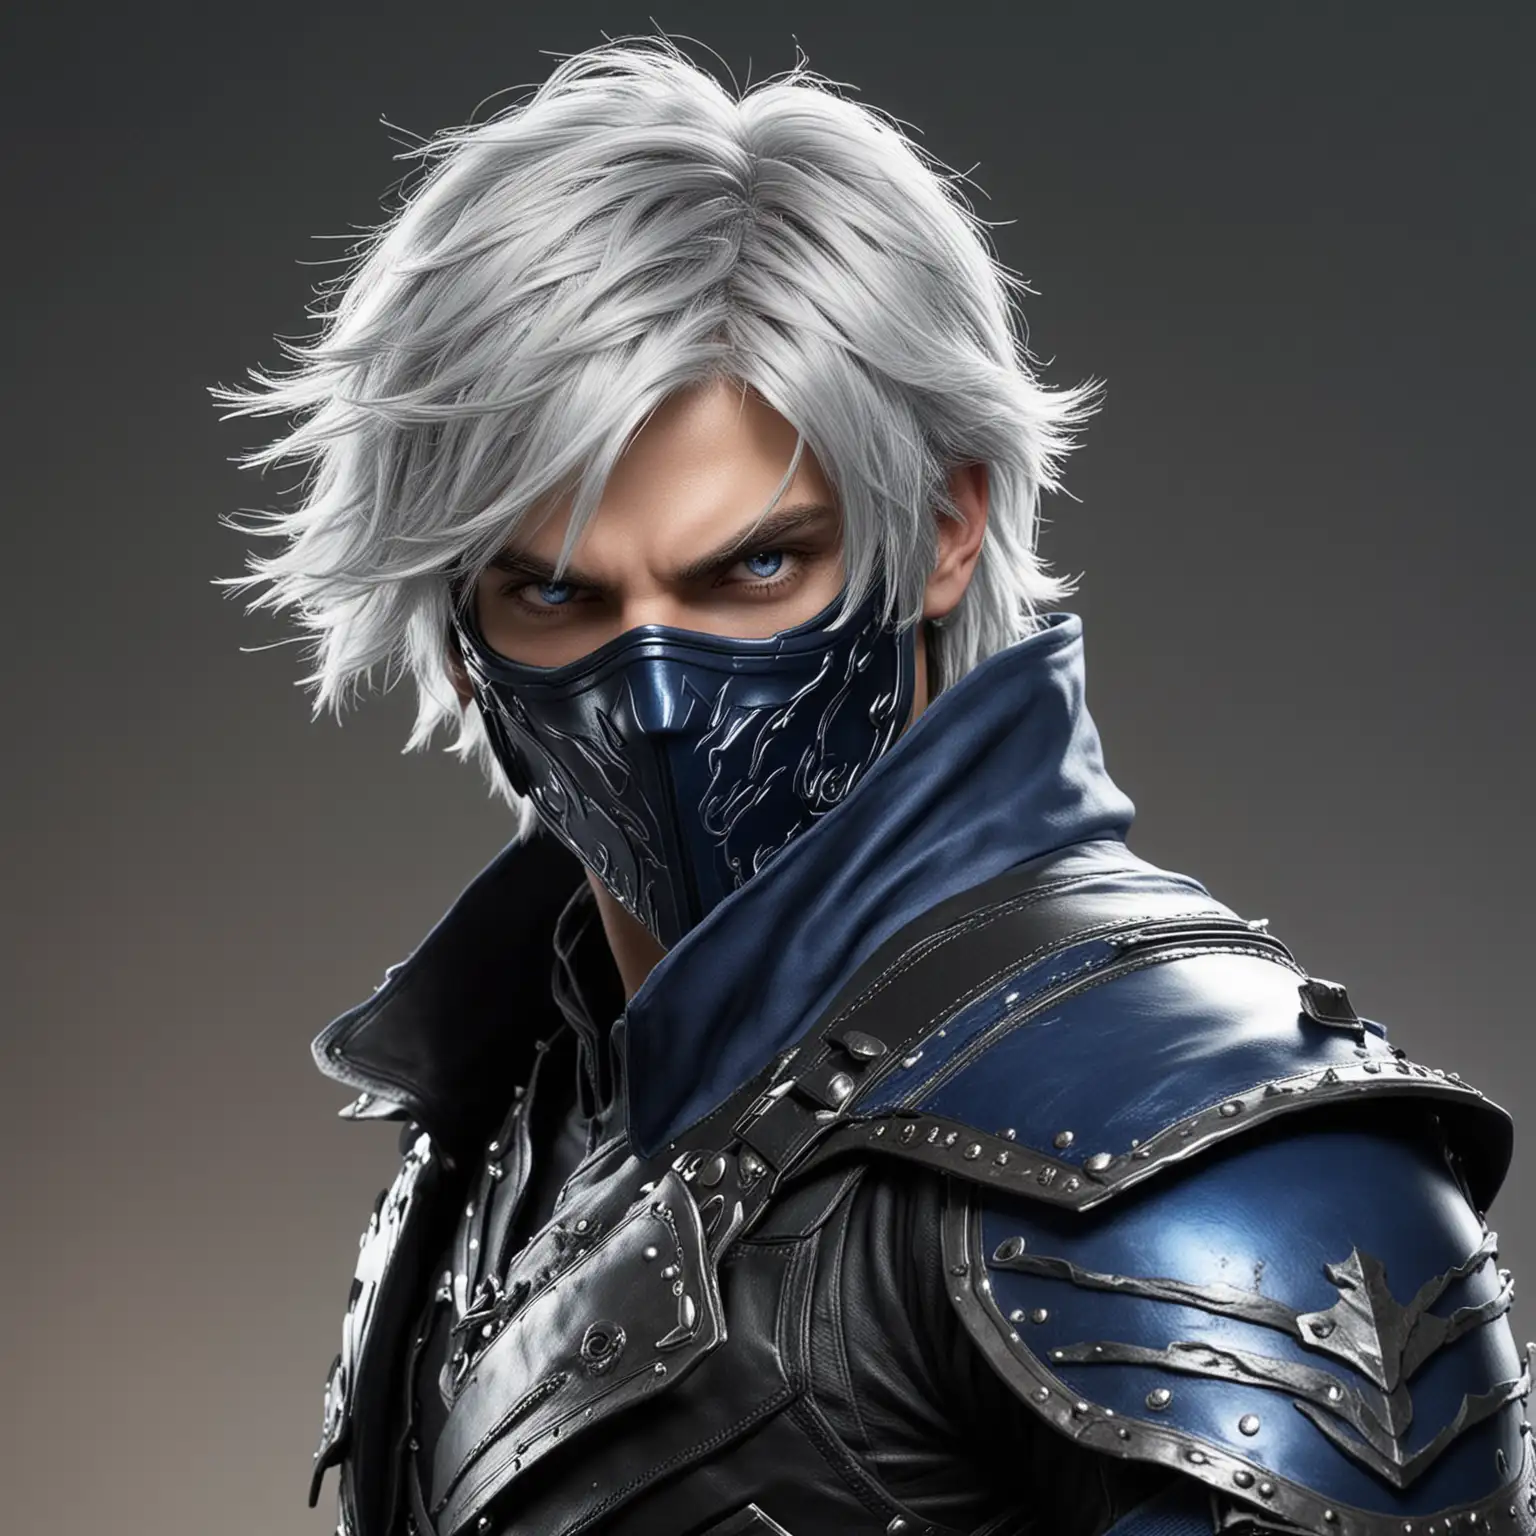 Fantasy male assassin, black and blue leather armor, short shaggy silver hair, hot, handsome, rugged, lightning abilities, a mask covering the lower mouth and nose